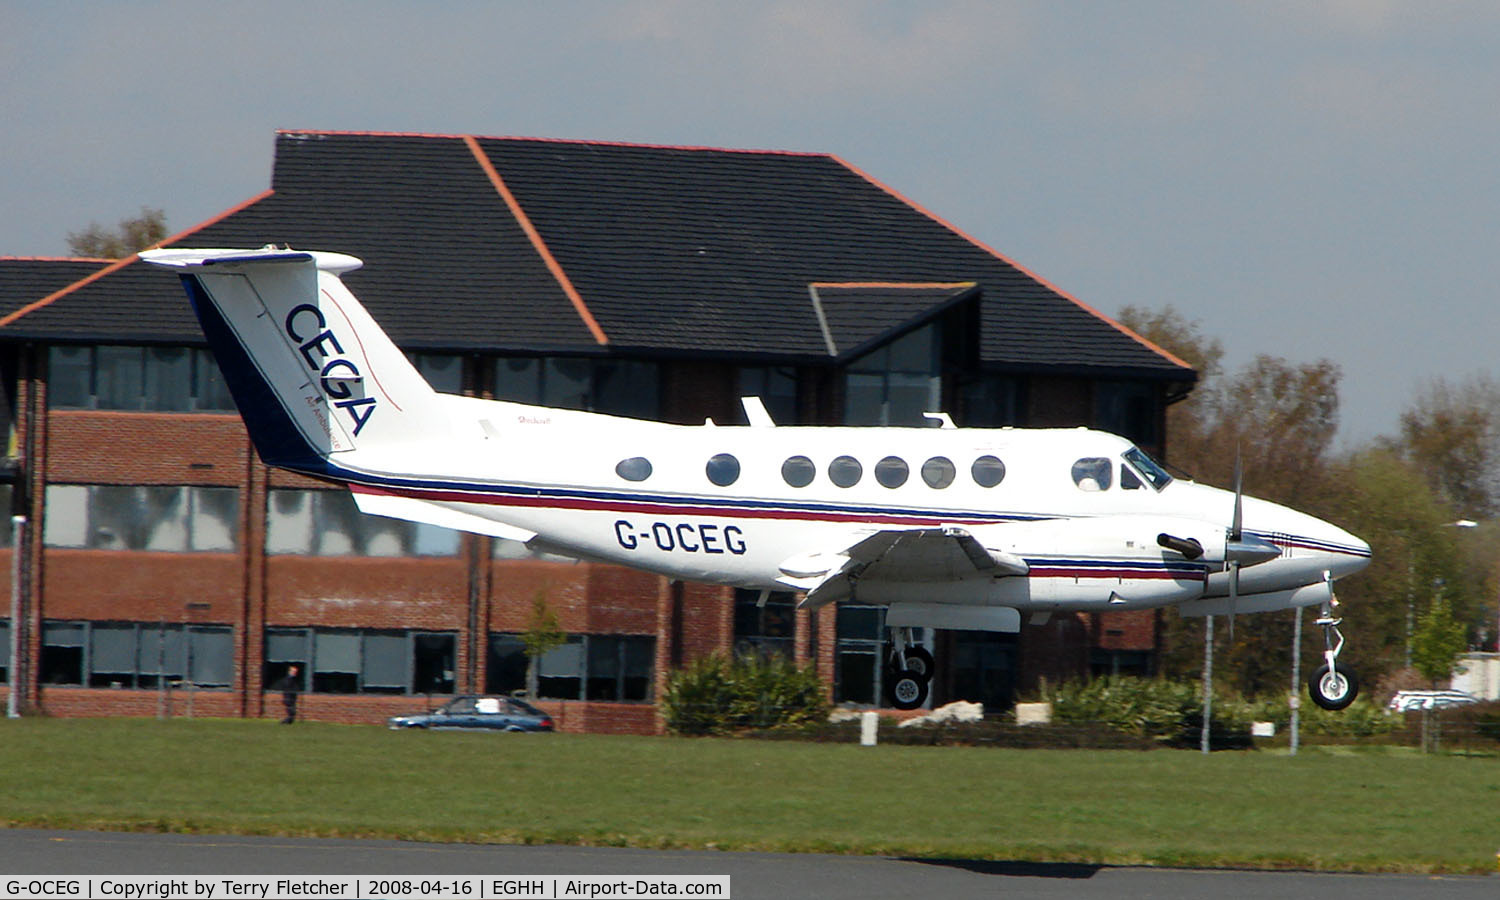 G-OCEG, 1980 Beech B200 King Air C/N BB-588, Cega's Beech 200 arriving at Bourne,outh in April 2008